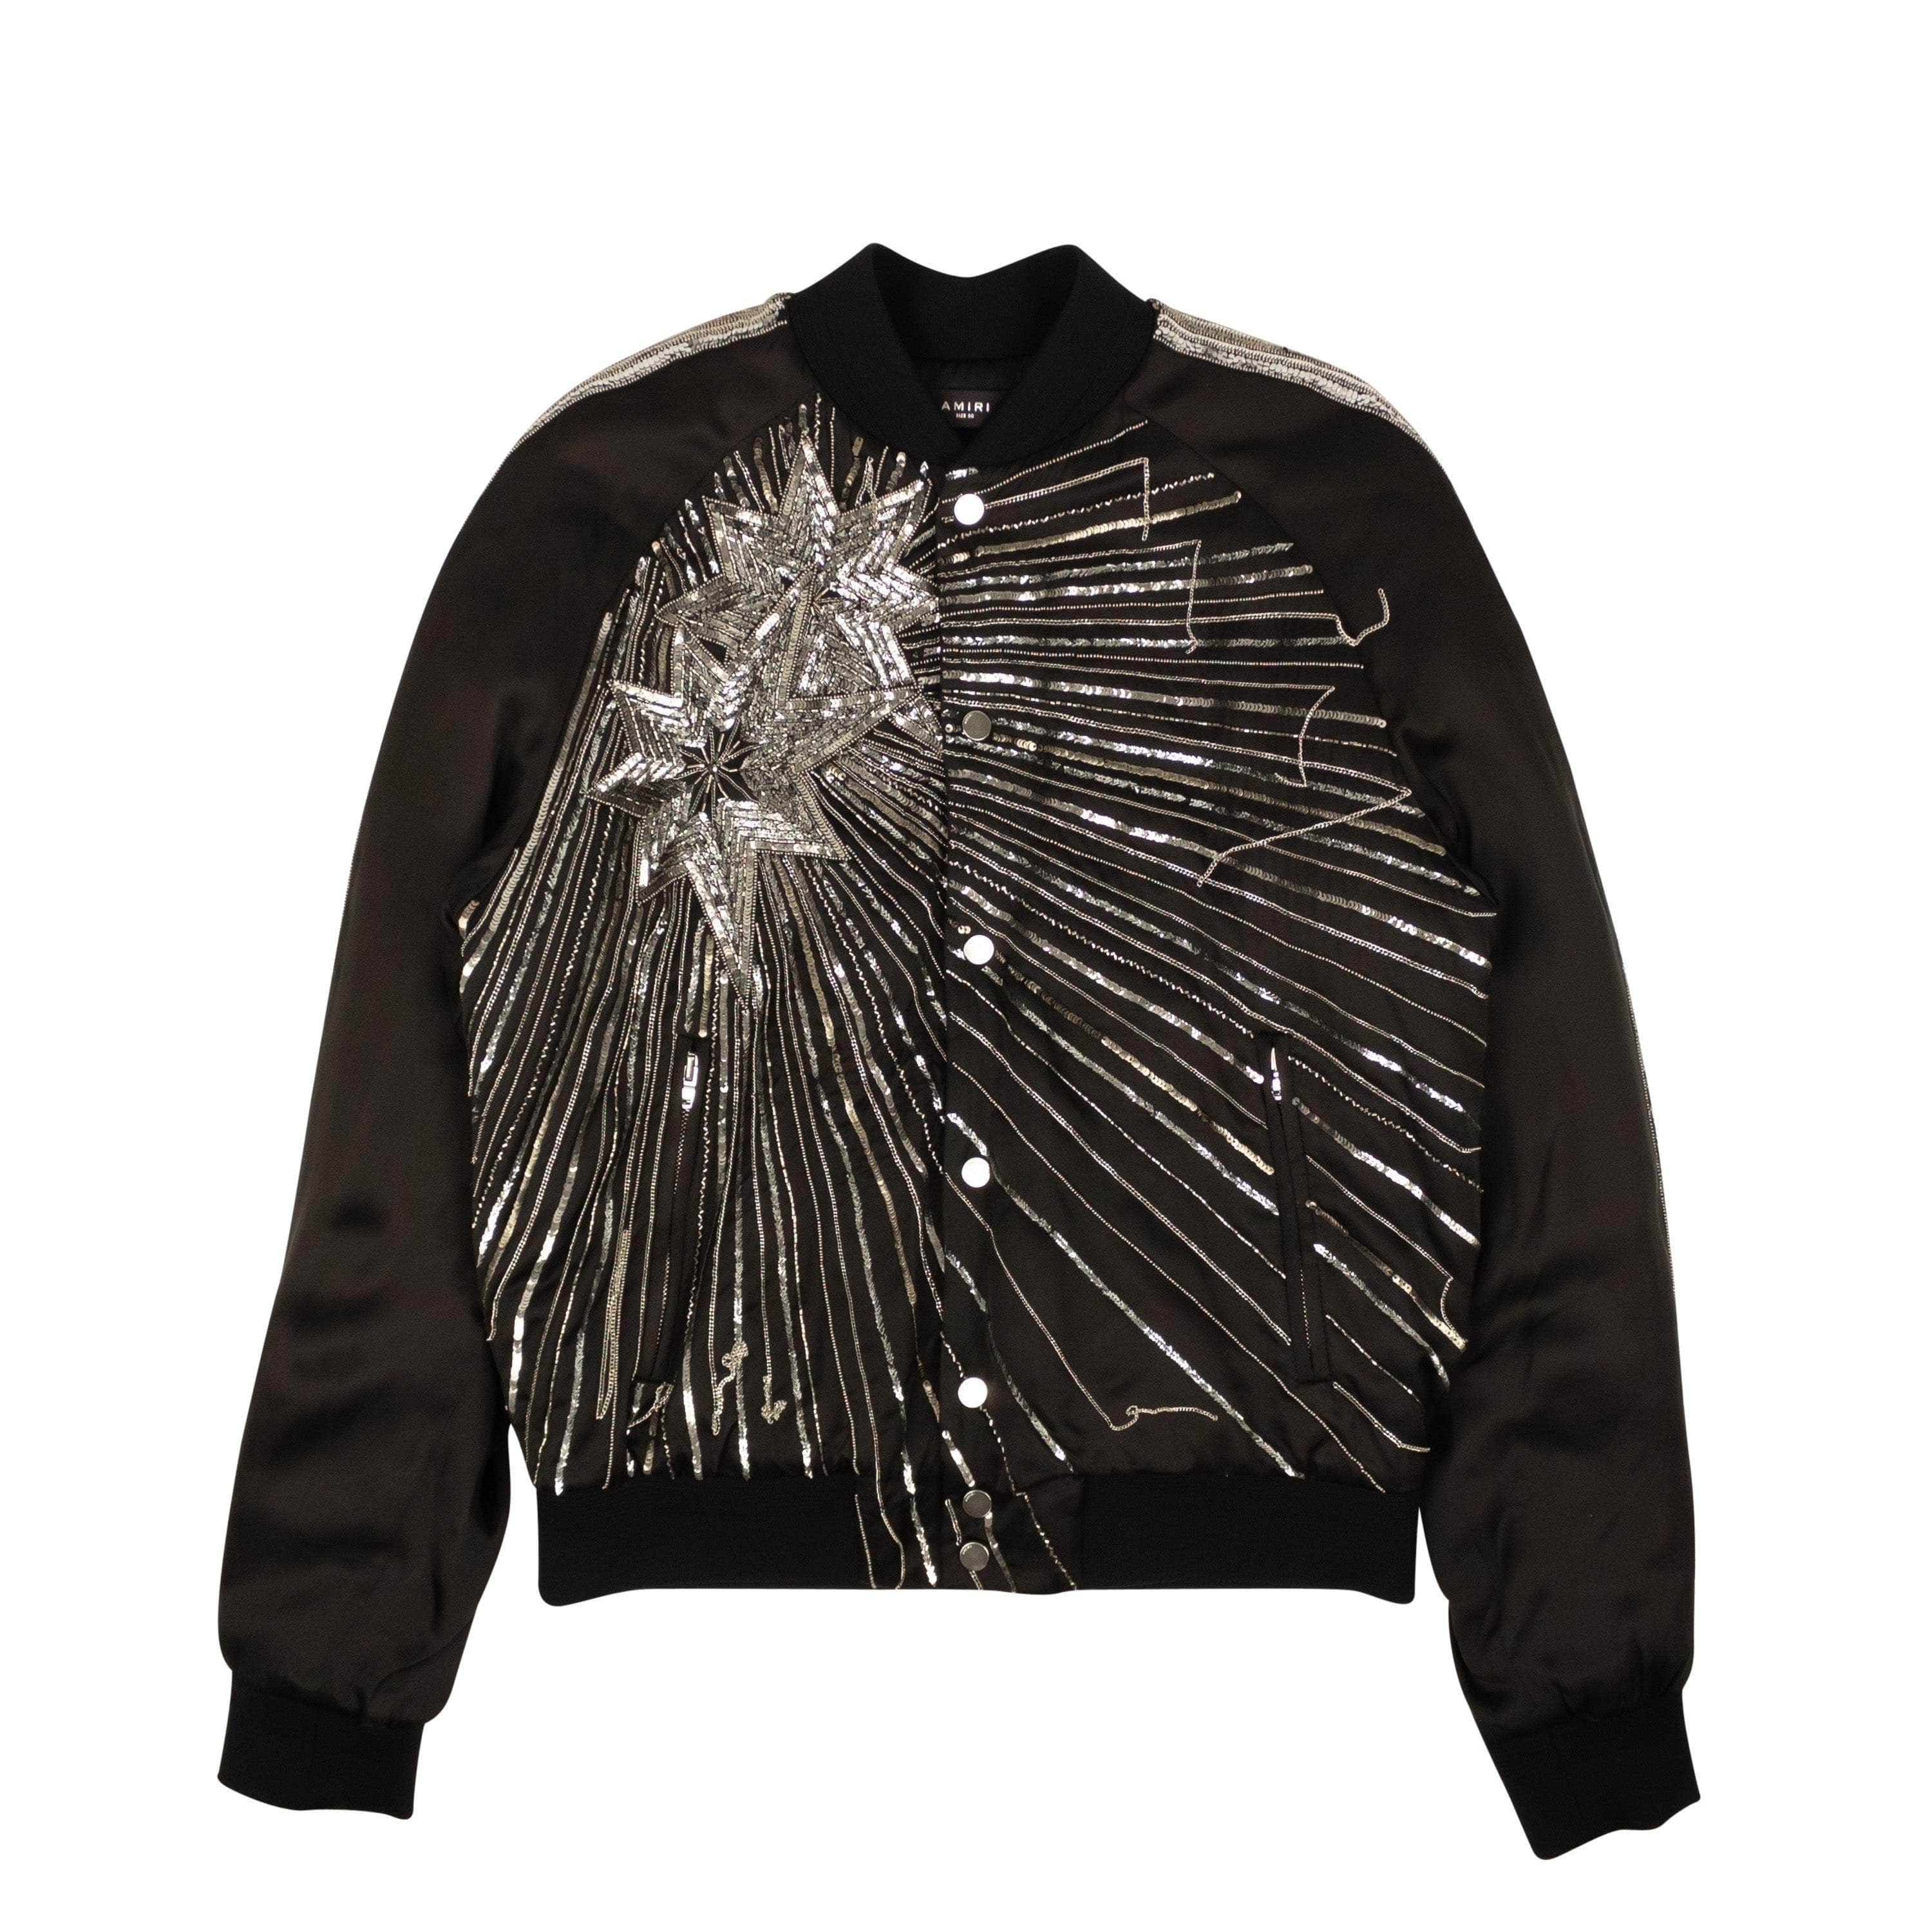 Amiri 2000-5000, amiri, channelenable-all, chicmi, couponcollection, gender-mens, main-clothing, mens-bombers, mens-shoes, size-50 50 Black Viscose Beaded Star Design Bomber Jacket AMR-XOTW-0016/50 AMR-XOTW-0016/50